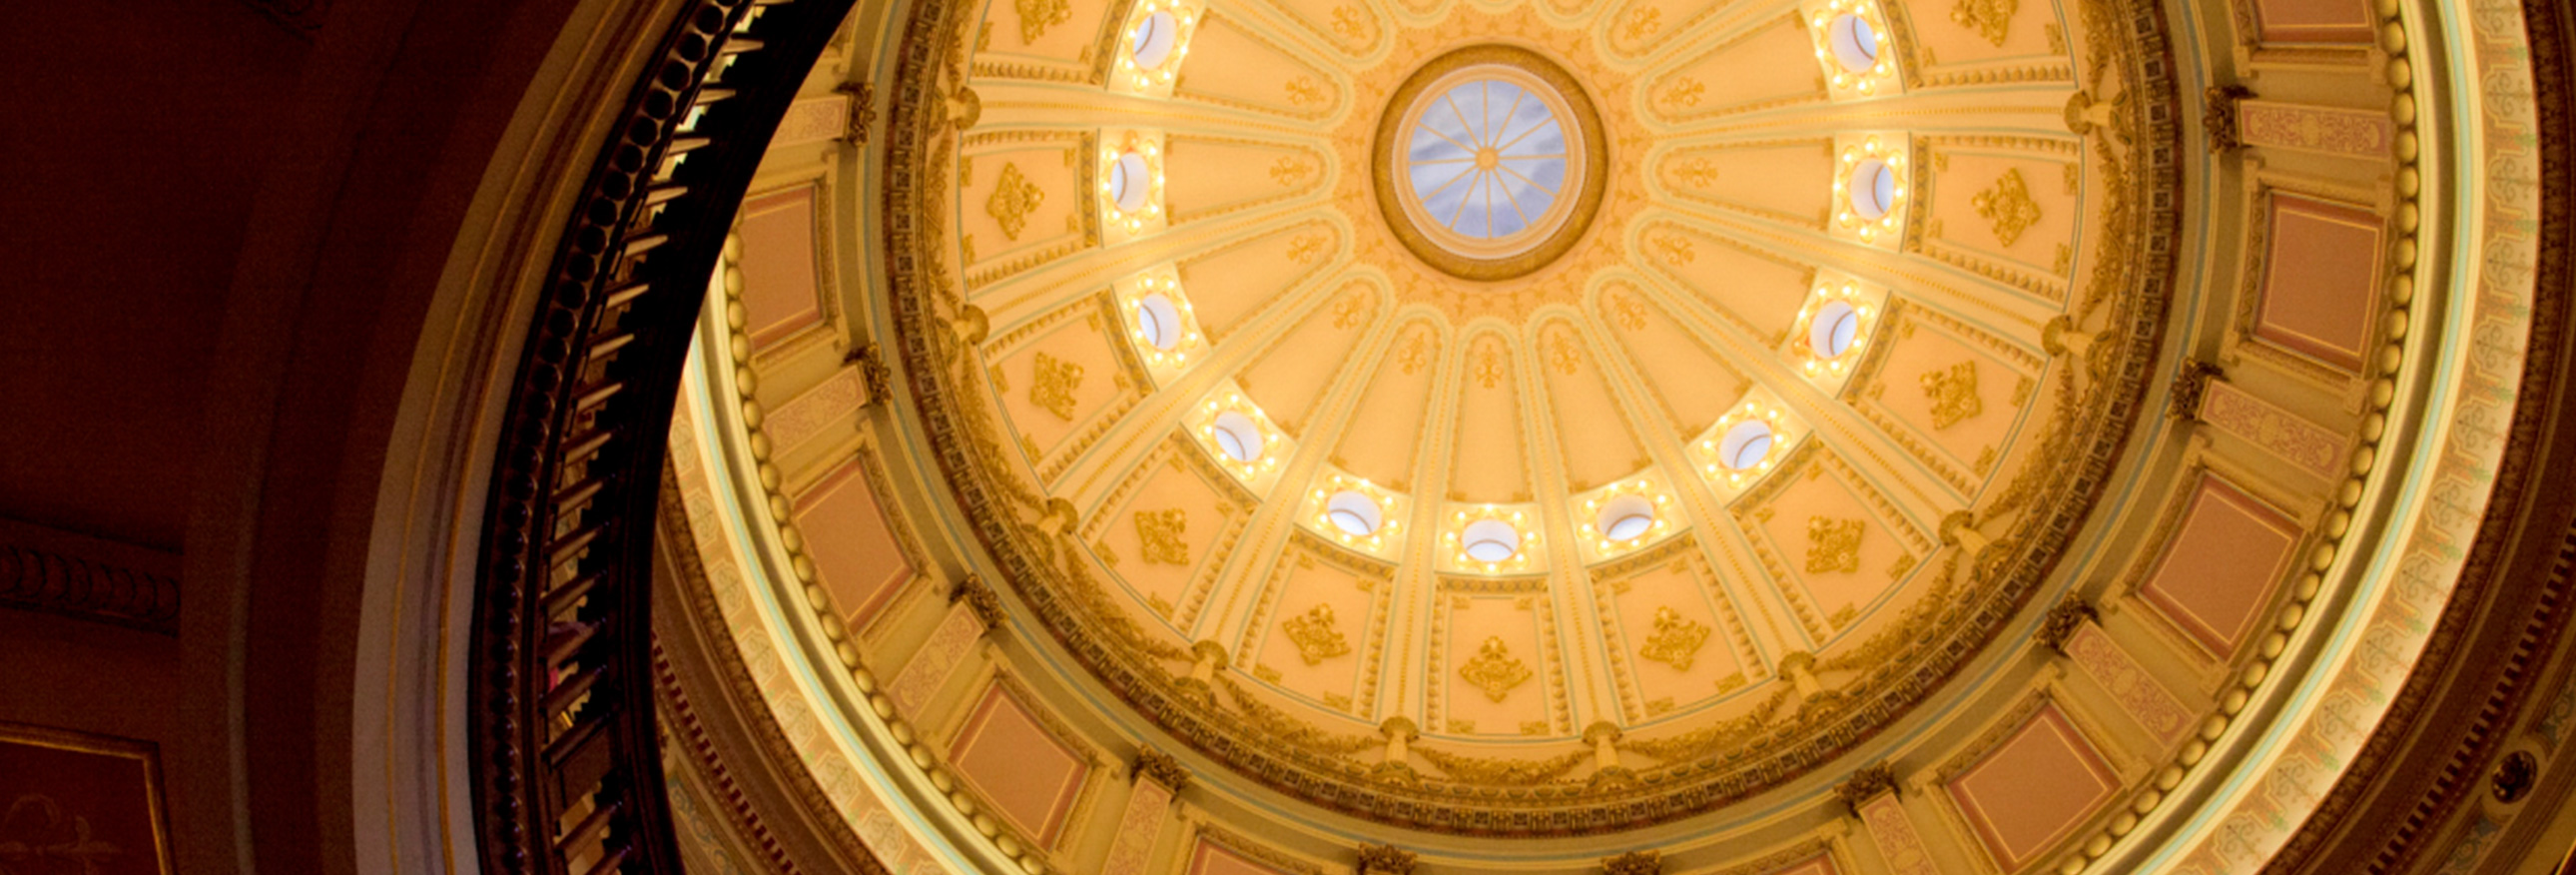 view looking up to rotunda of California capital building in Sacramento